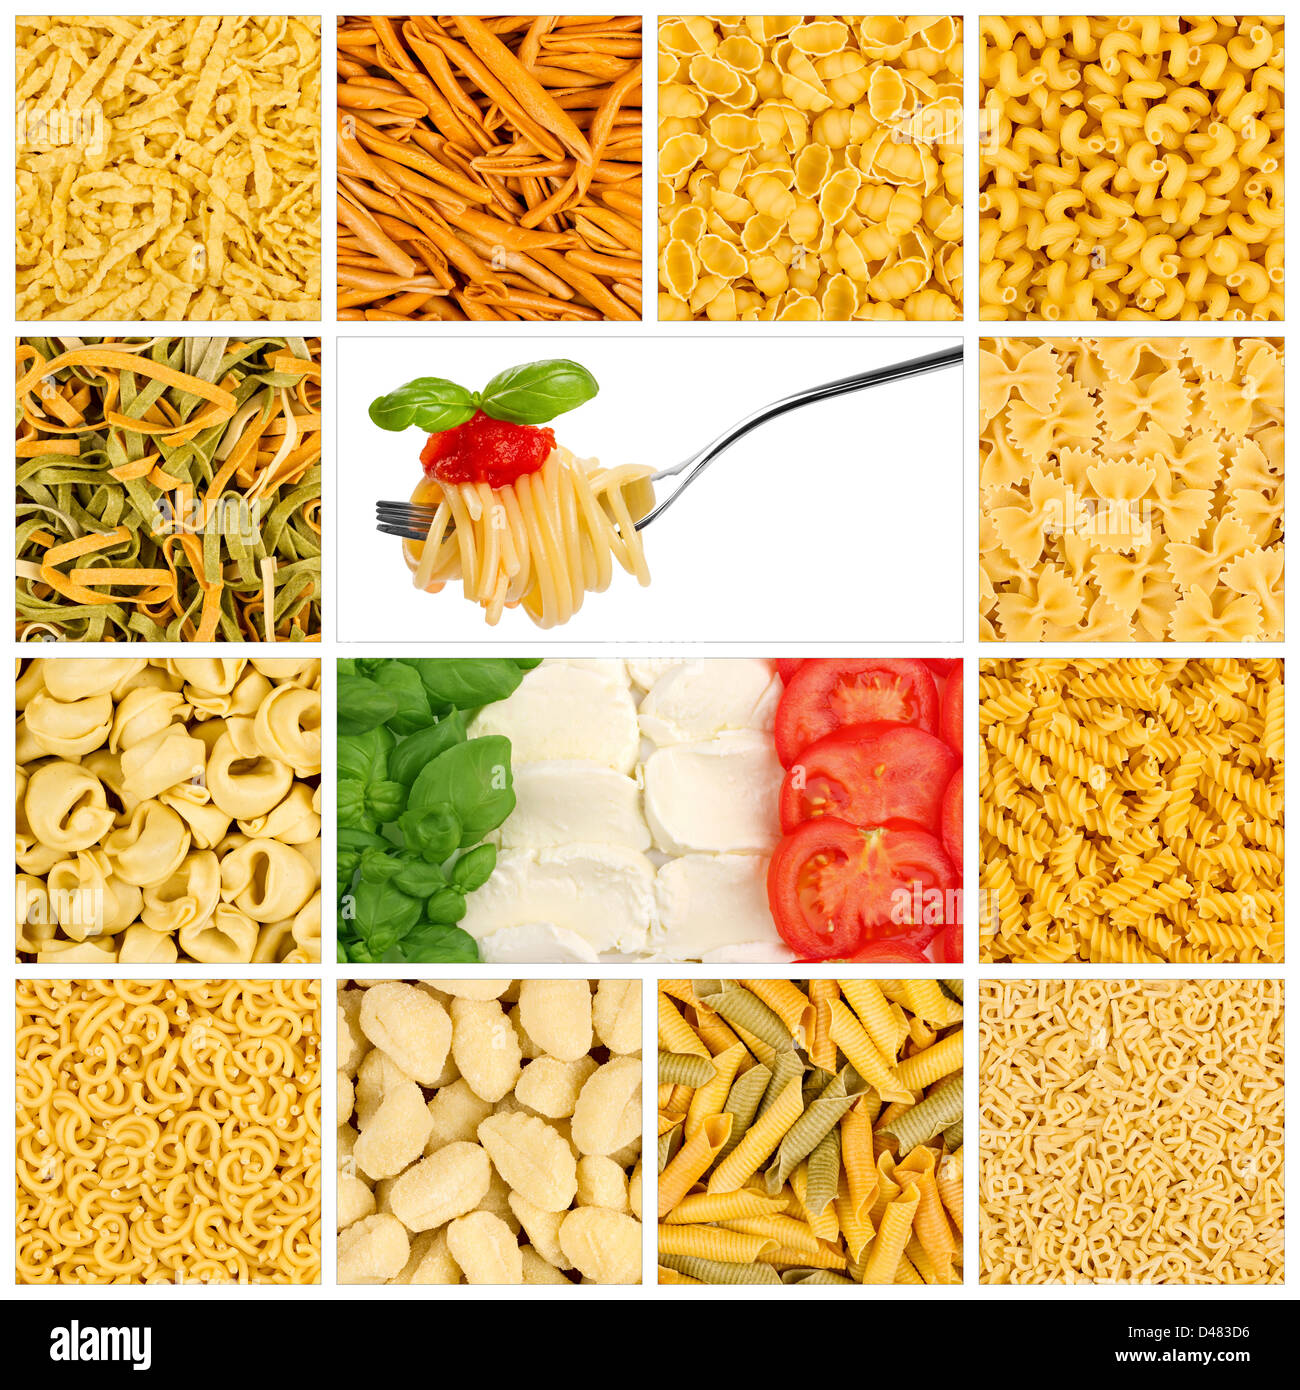 mosaic with choice of different noodles Stock Photo